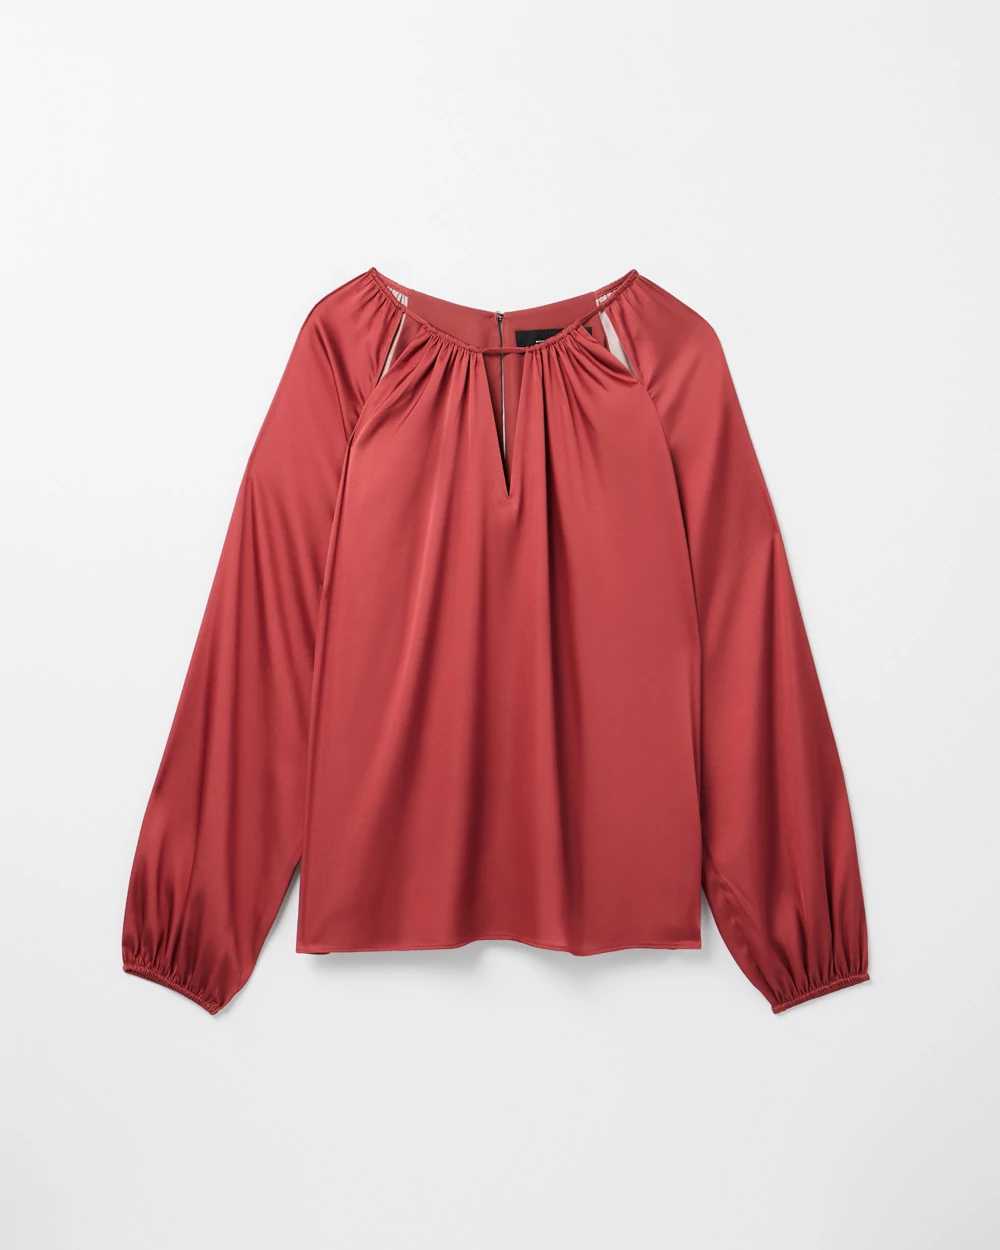 Long Sleeve Cutout Detail Blouse click to view larger image.